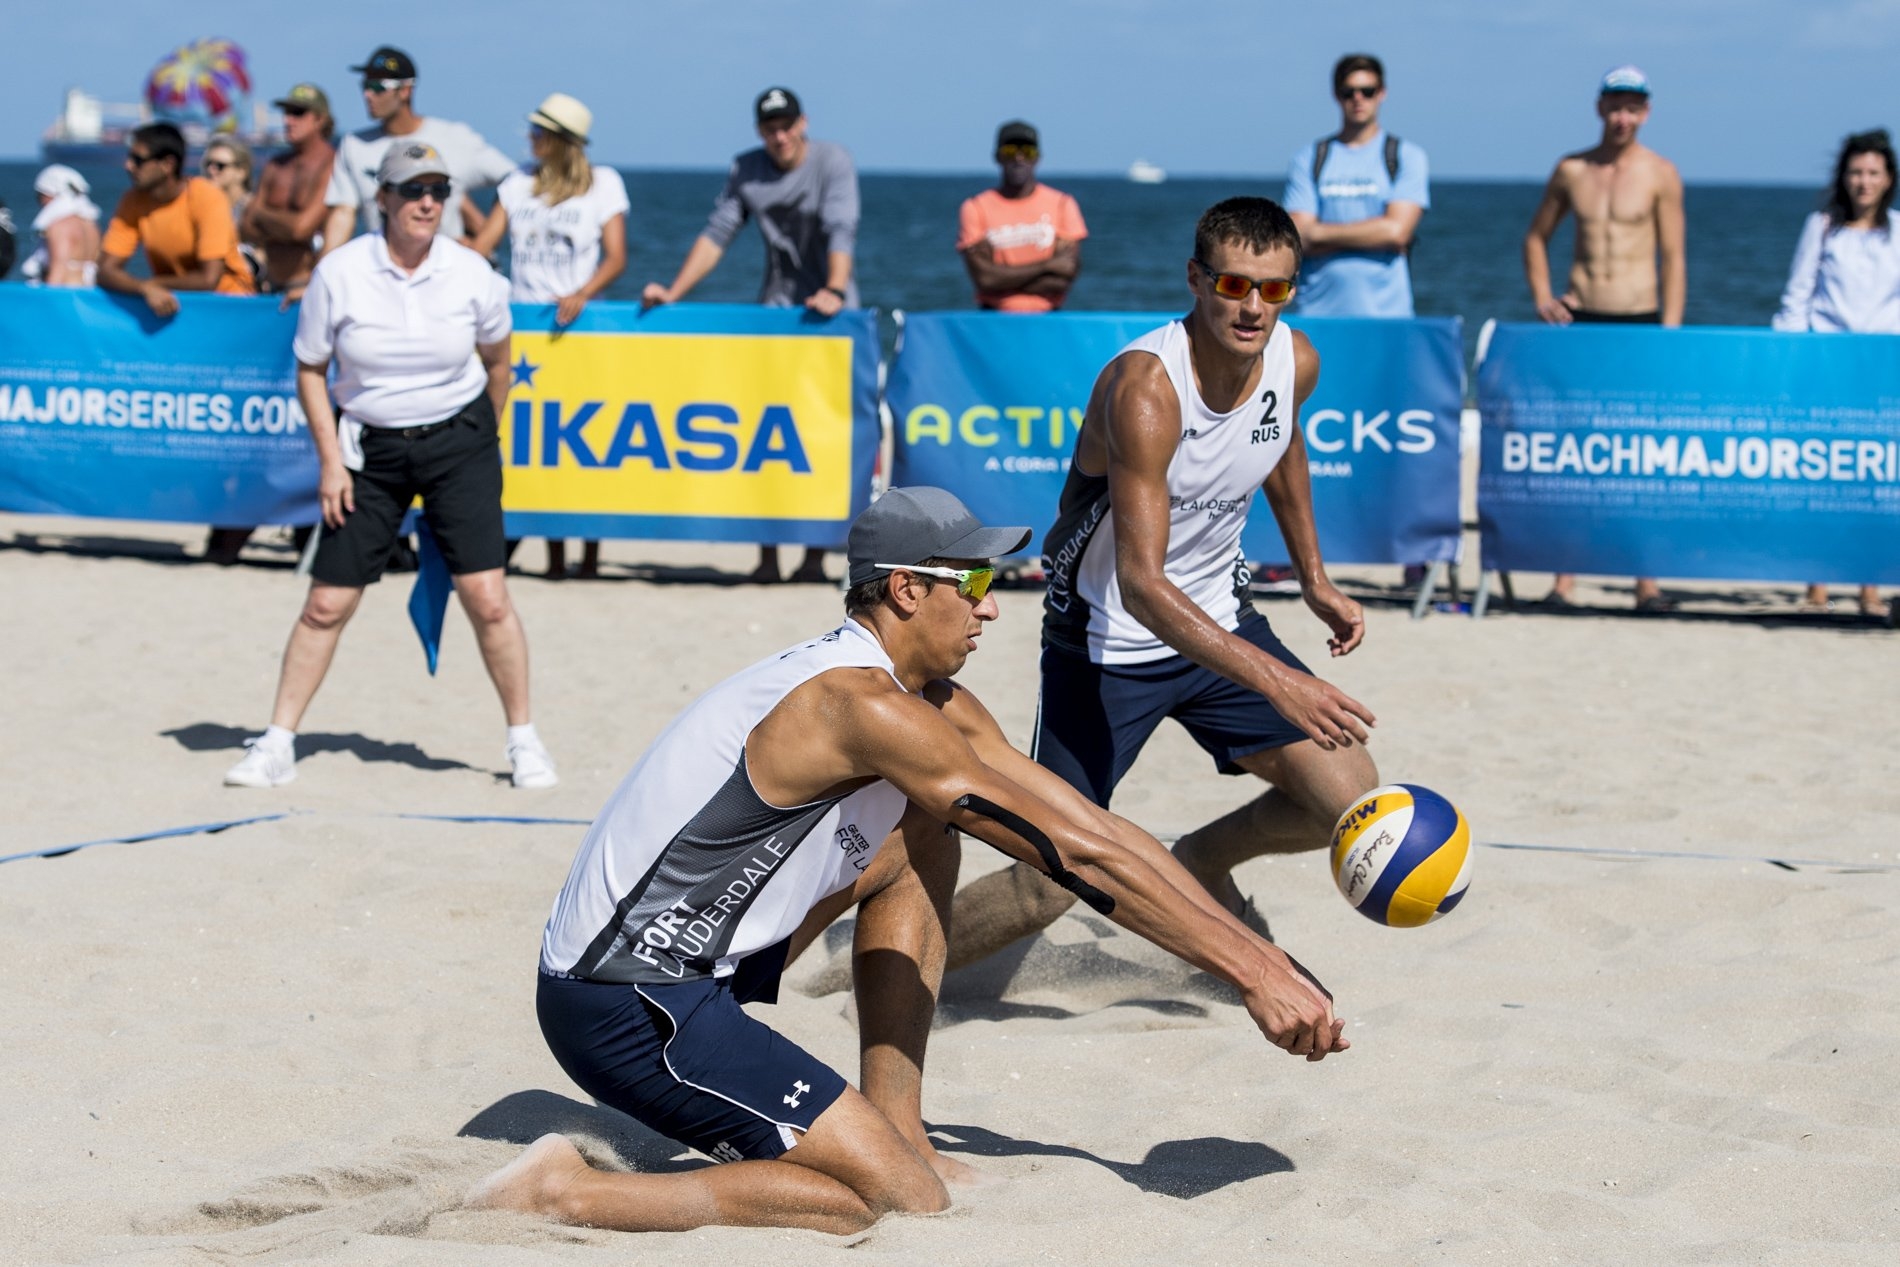 The young Russians debuted their team with a ninth place in the Fort Lauderdale Major